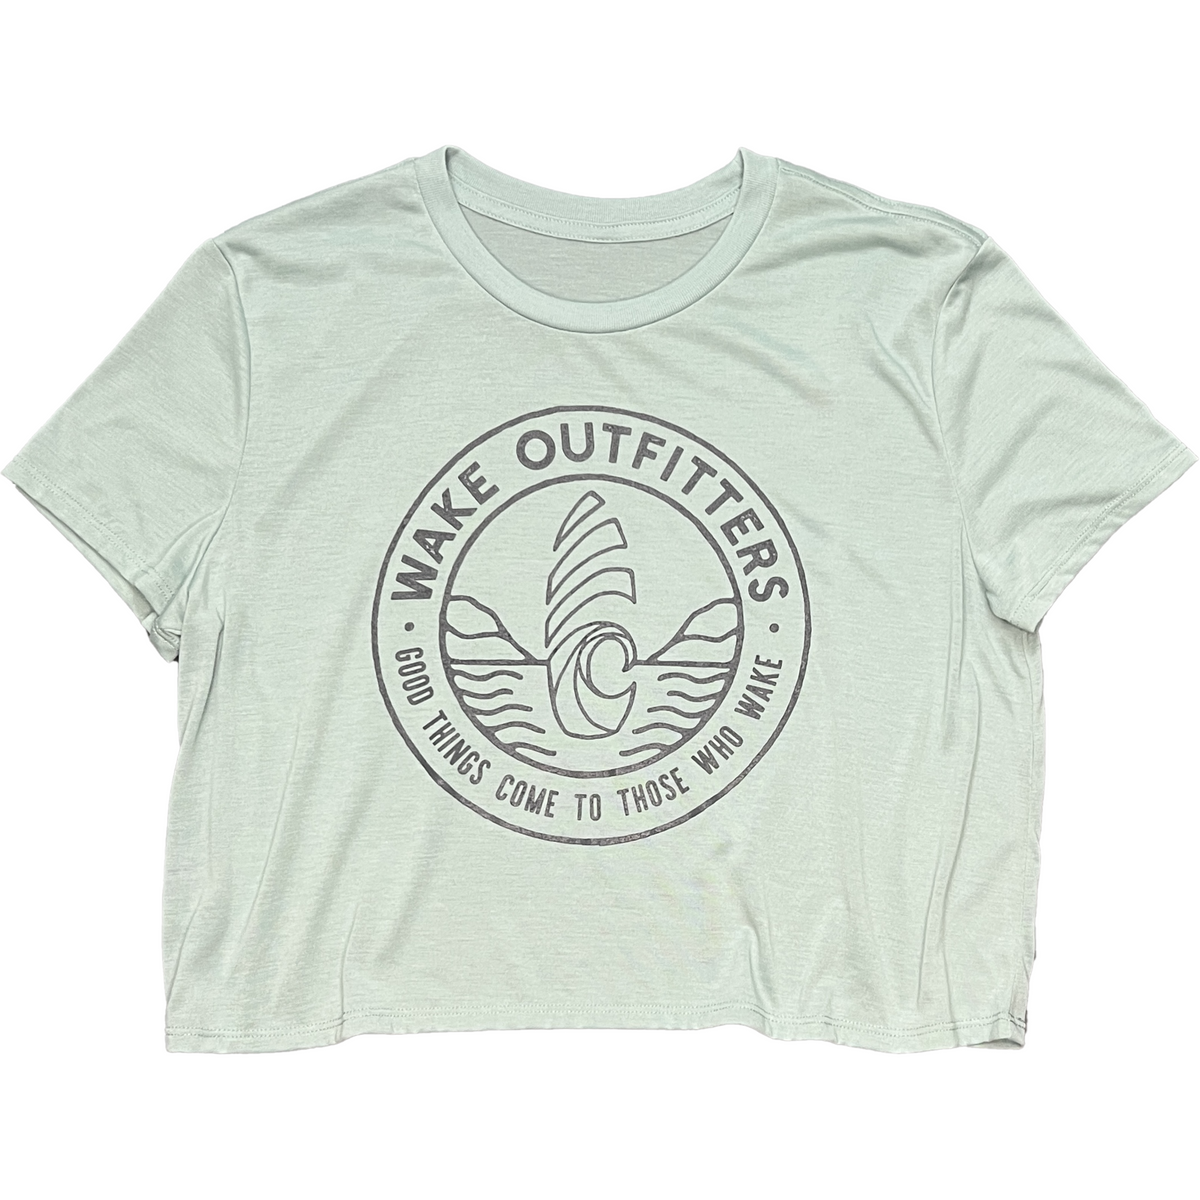 Wake Outfitters Crop Top - Dusty Blue